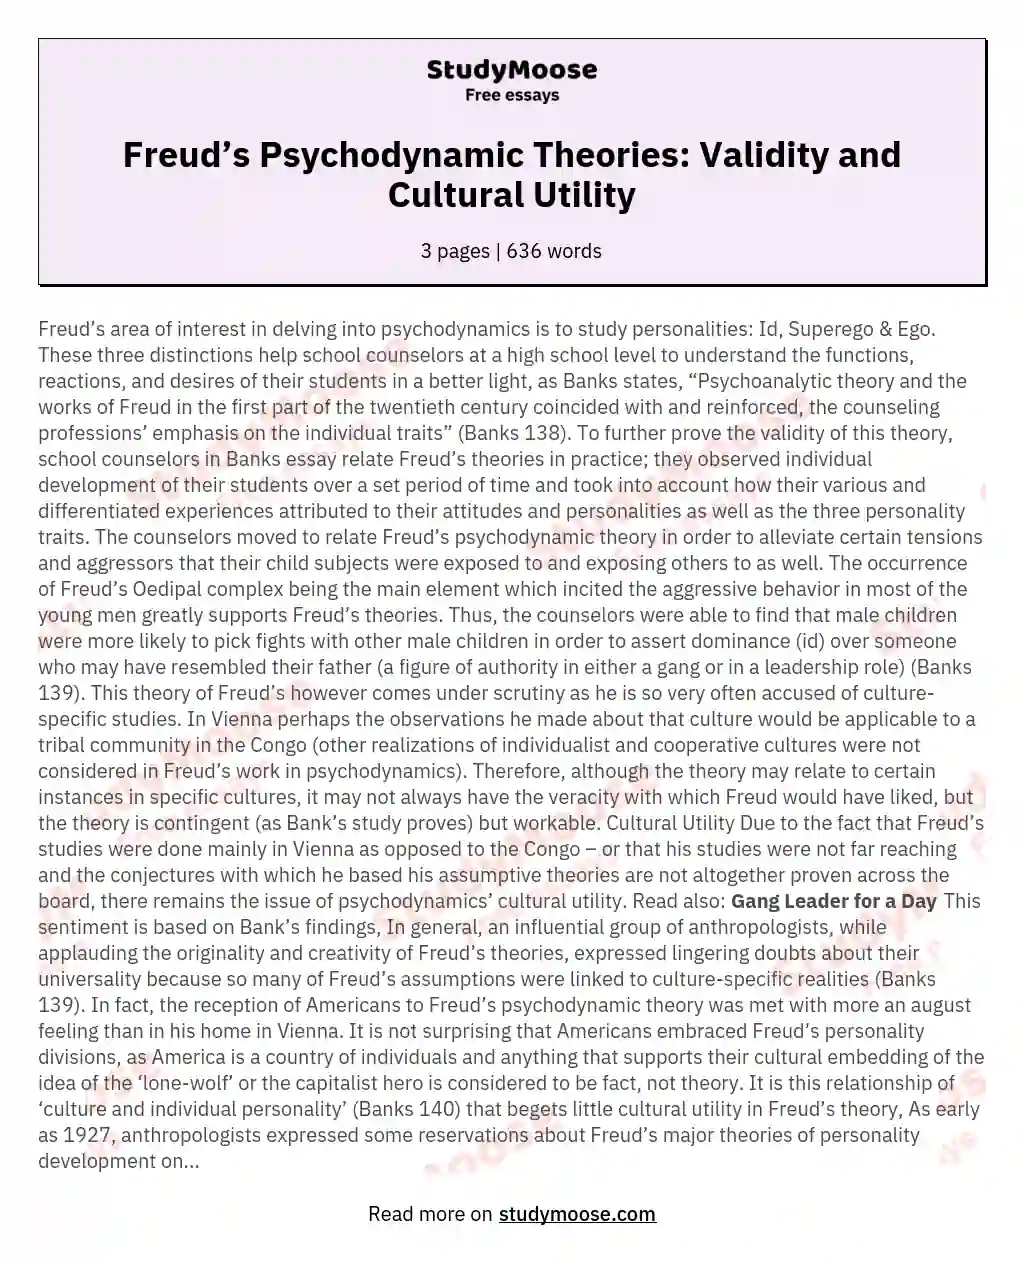 Freud’s Psychodynamic Theories: Validity and Cultural Utility essay